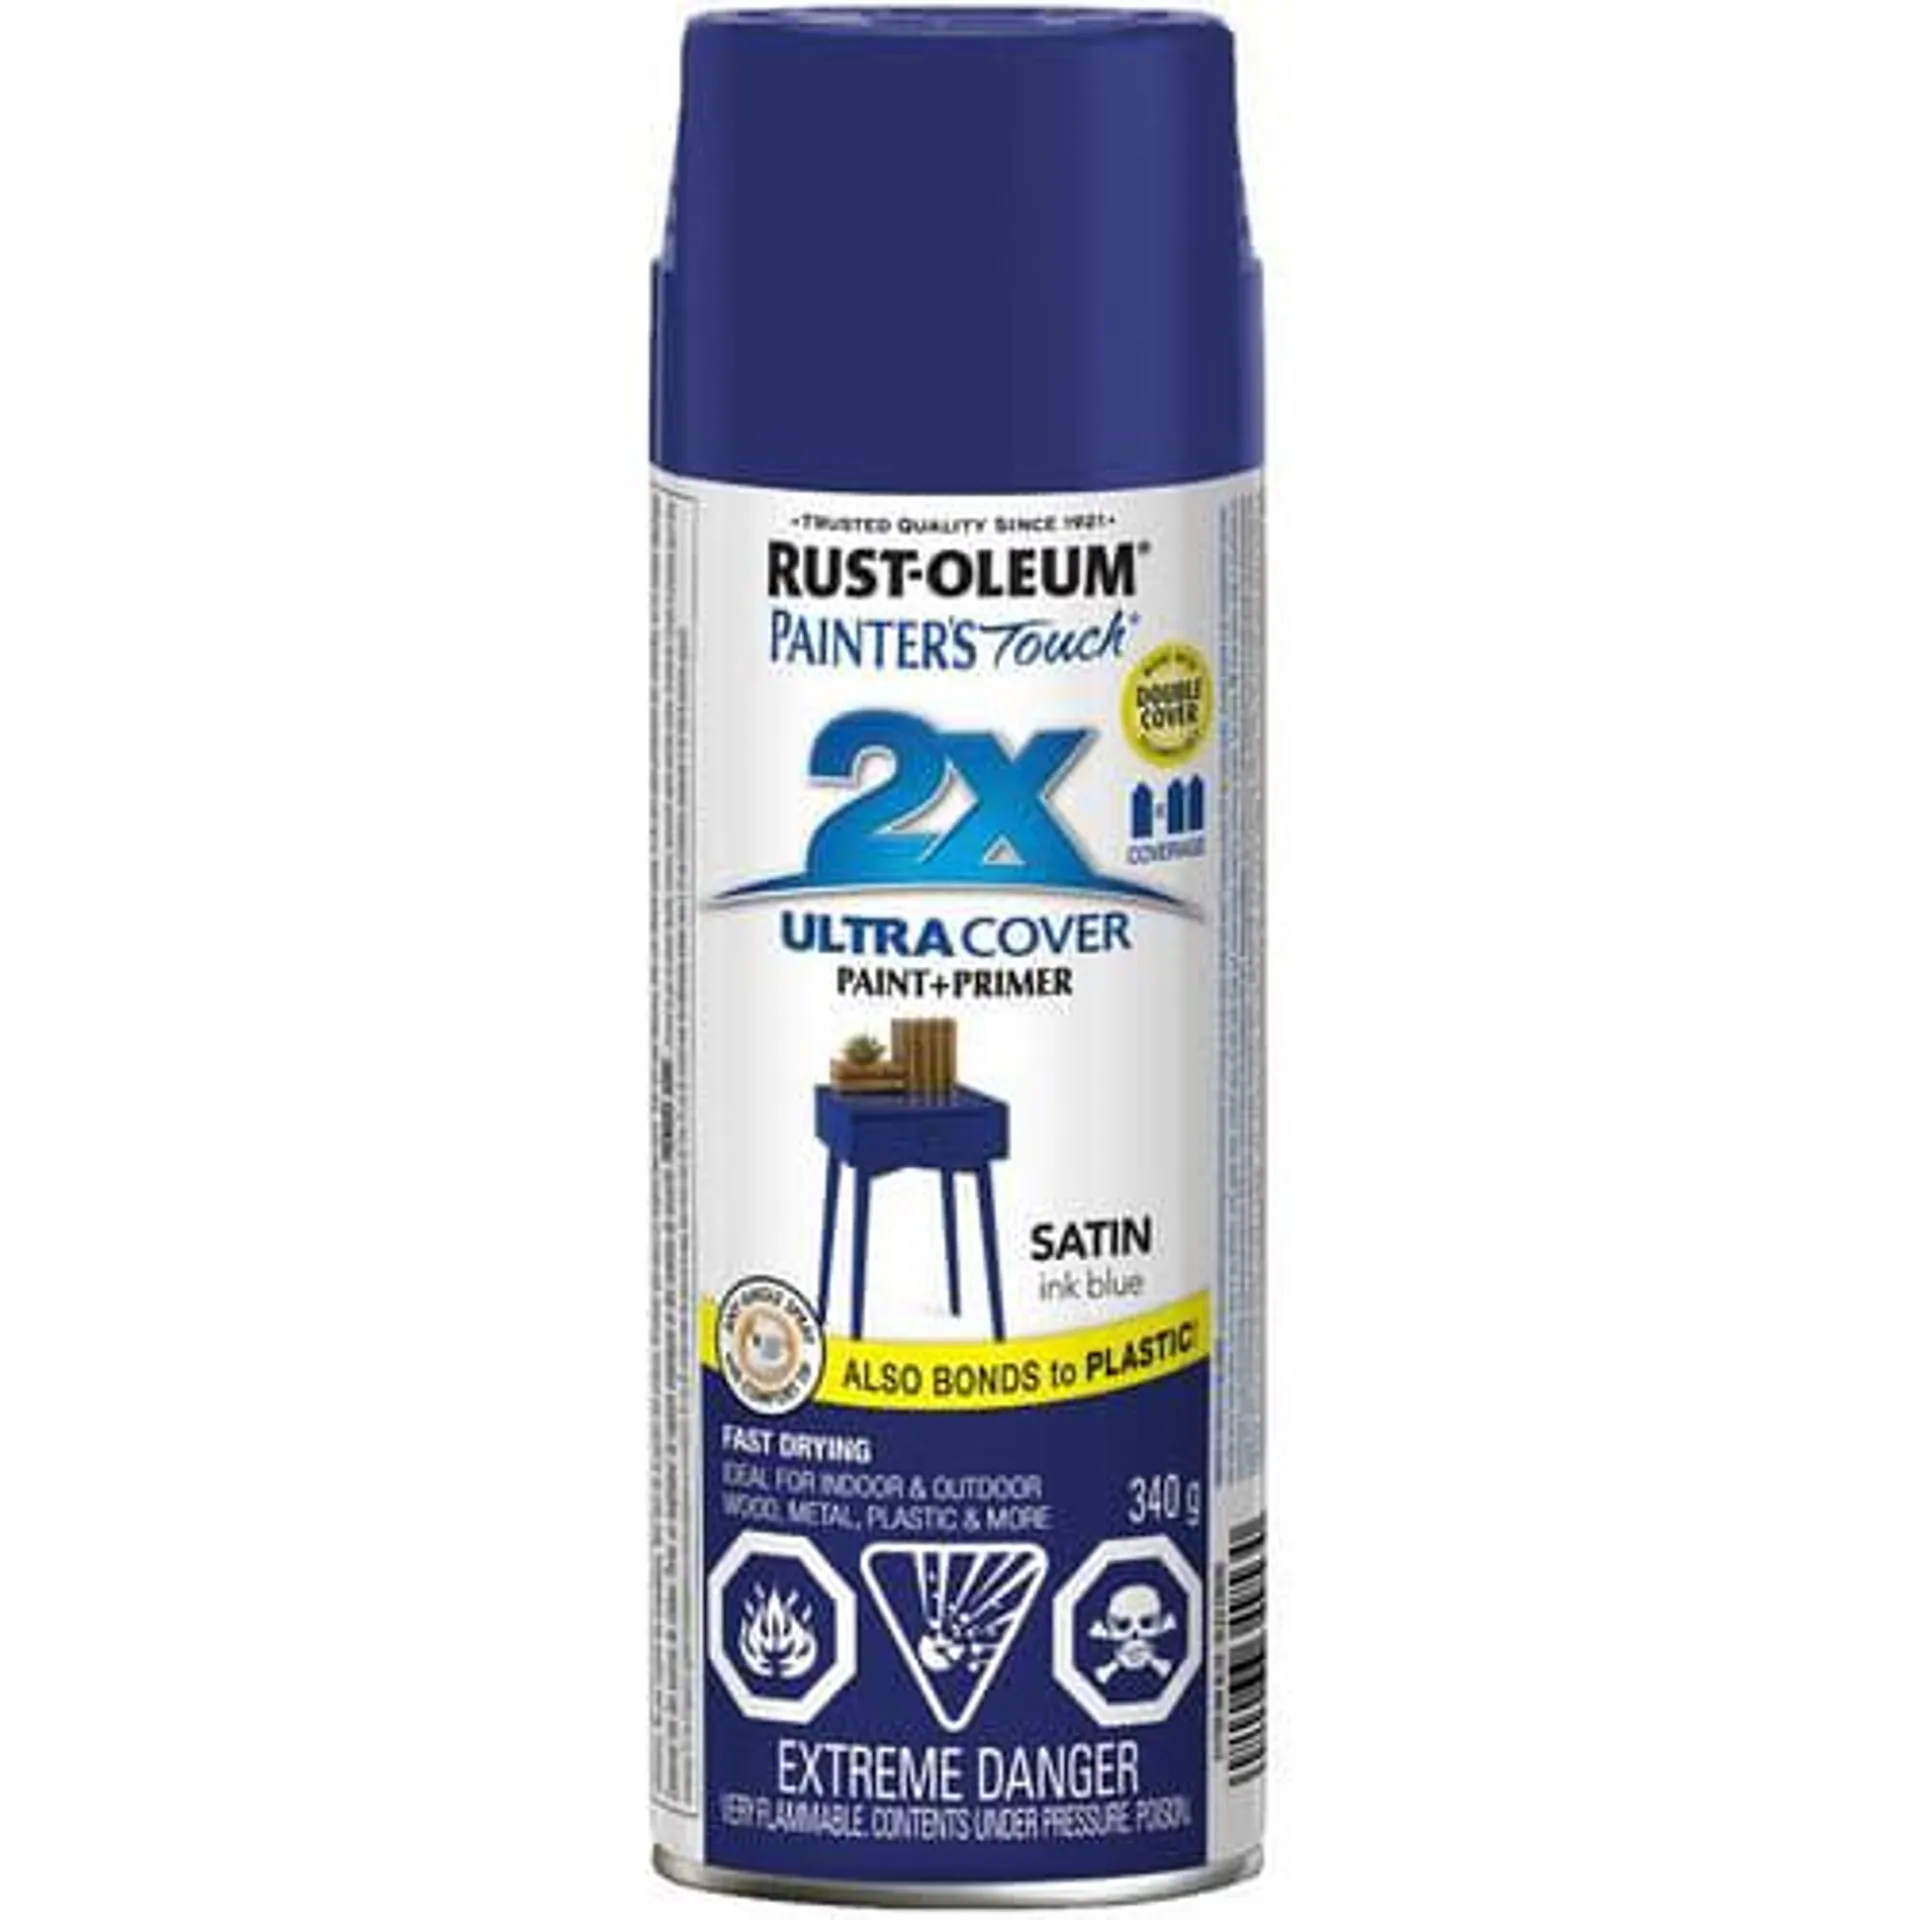 Painter's Touch 2X Ultra Cover Spray Paint - Satin Ink Blue, 340 g